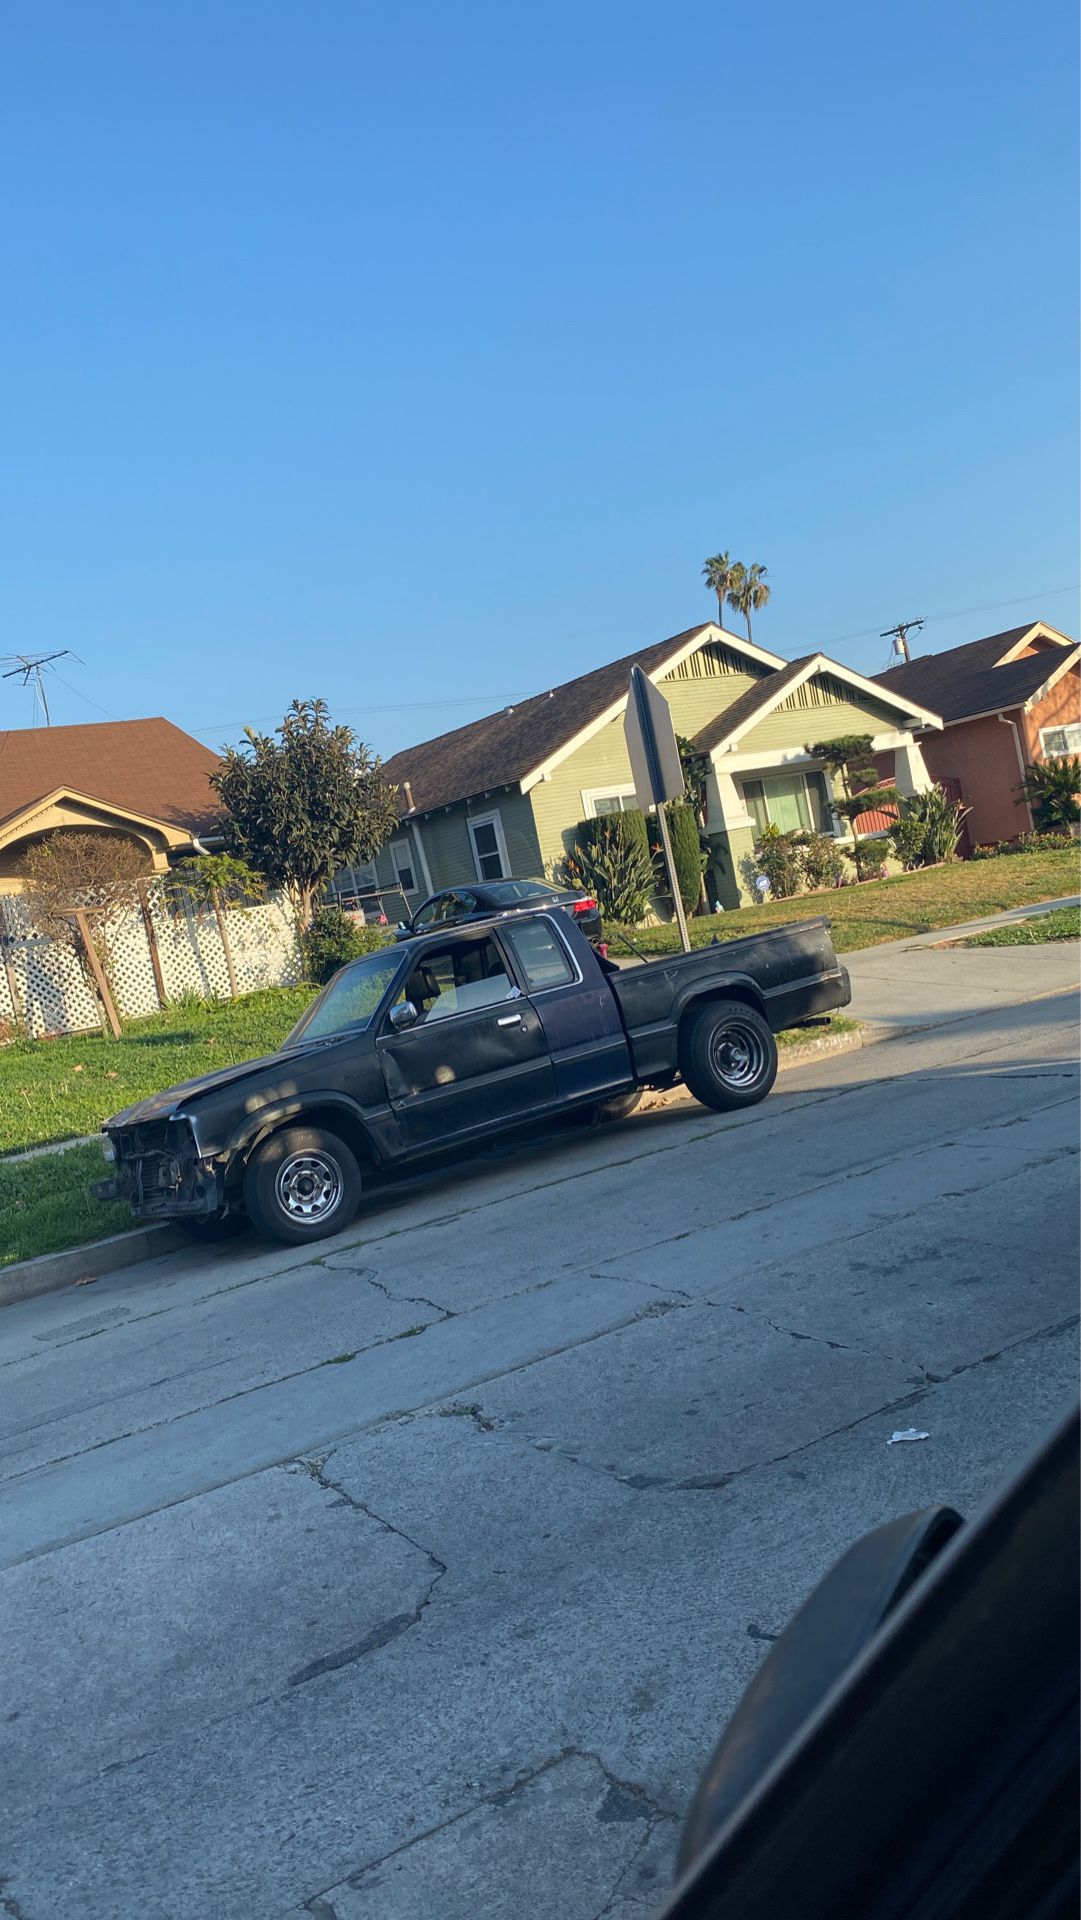 Mazda pick up truck Entire truck for sale or parts